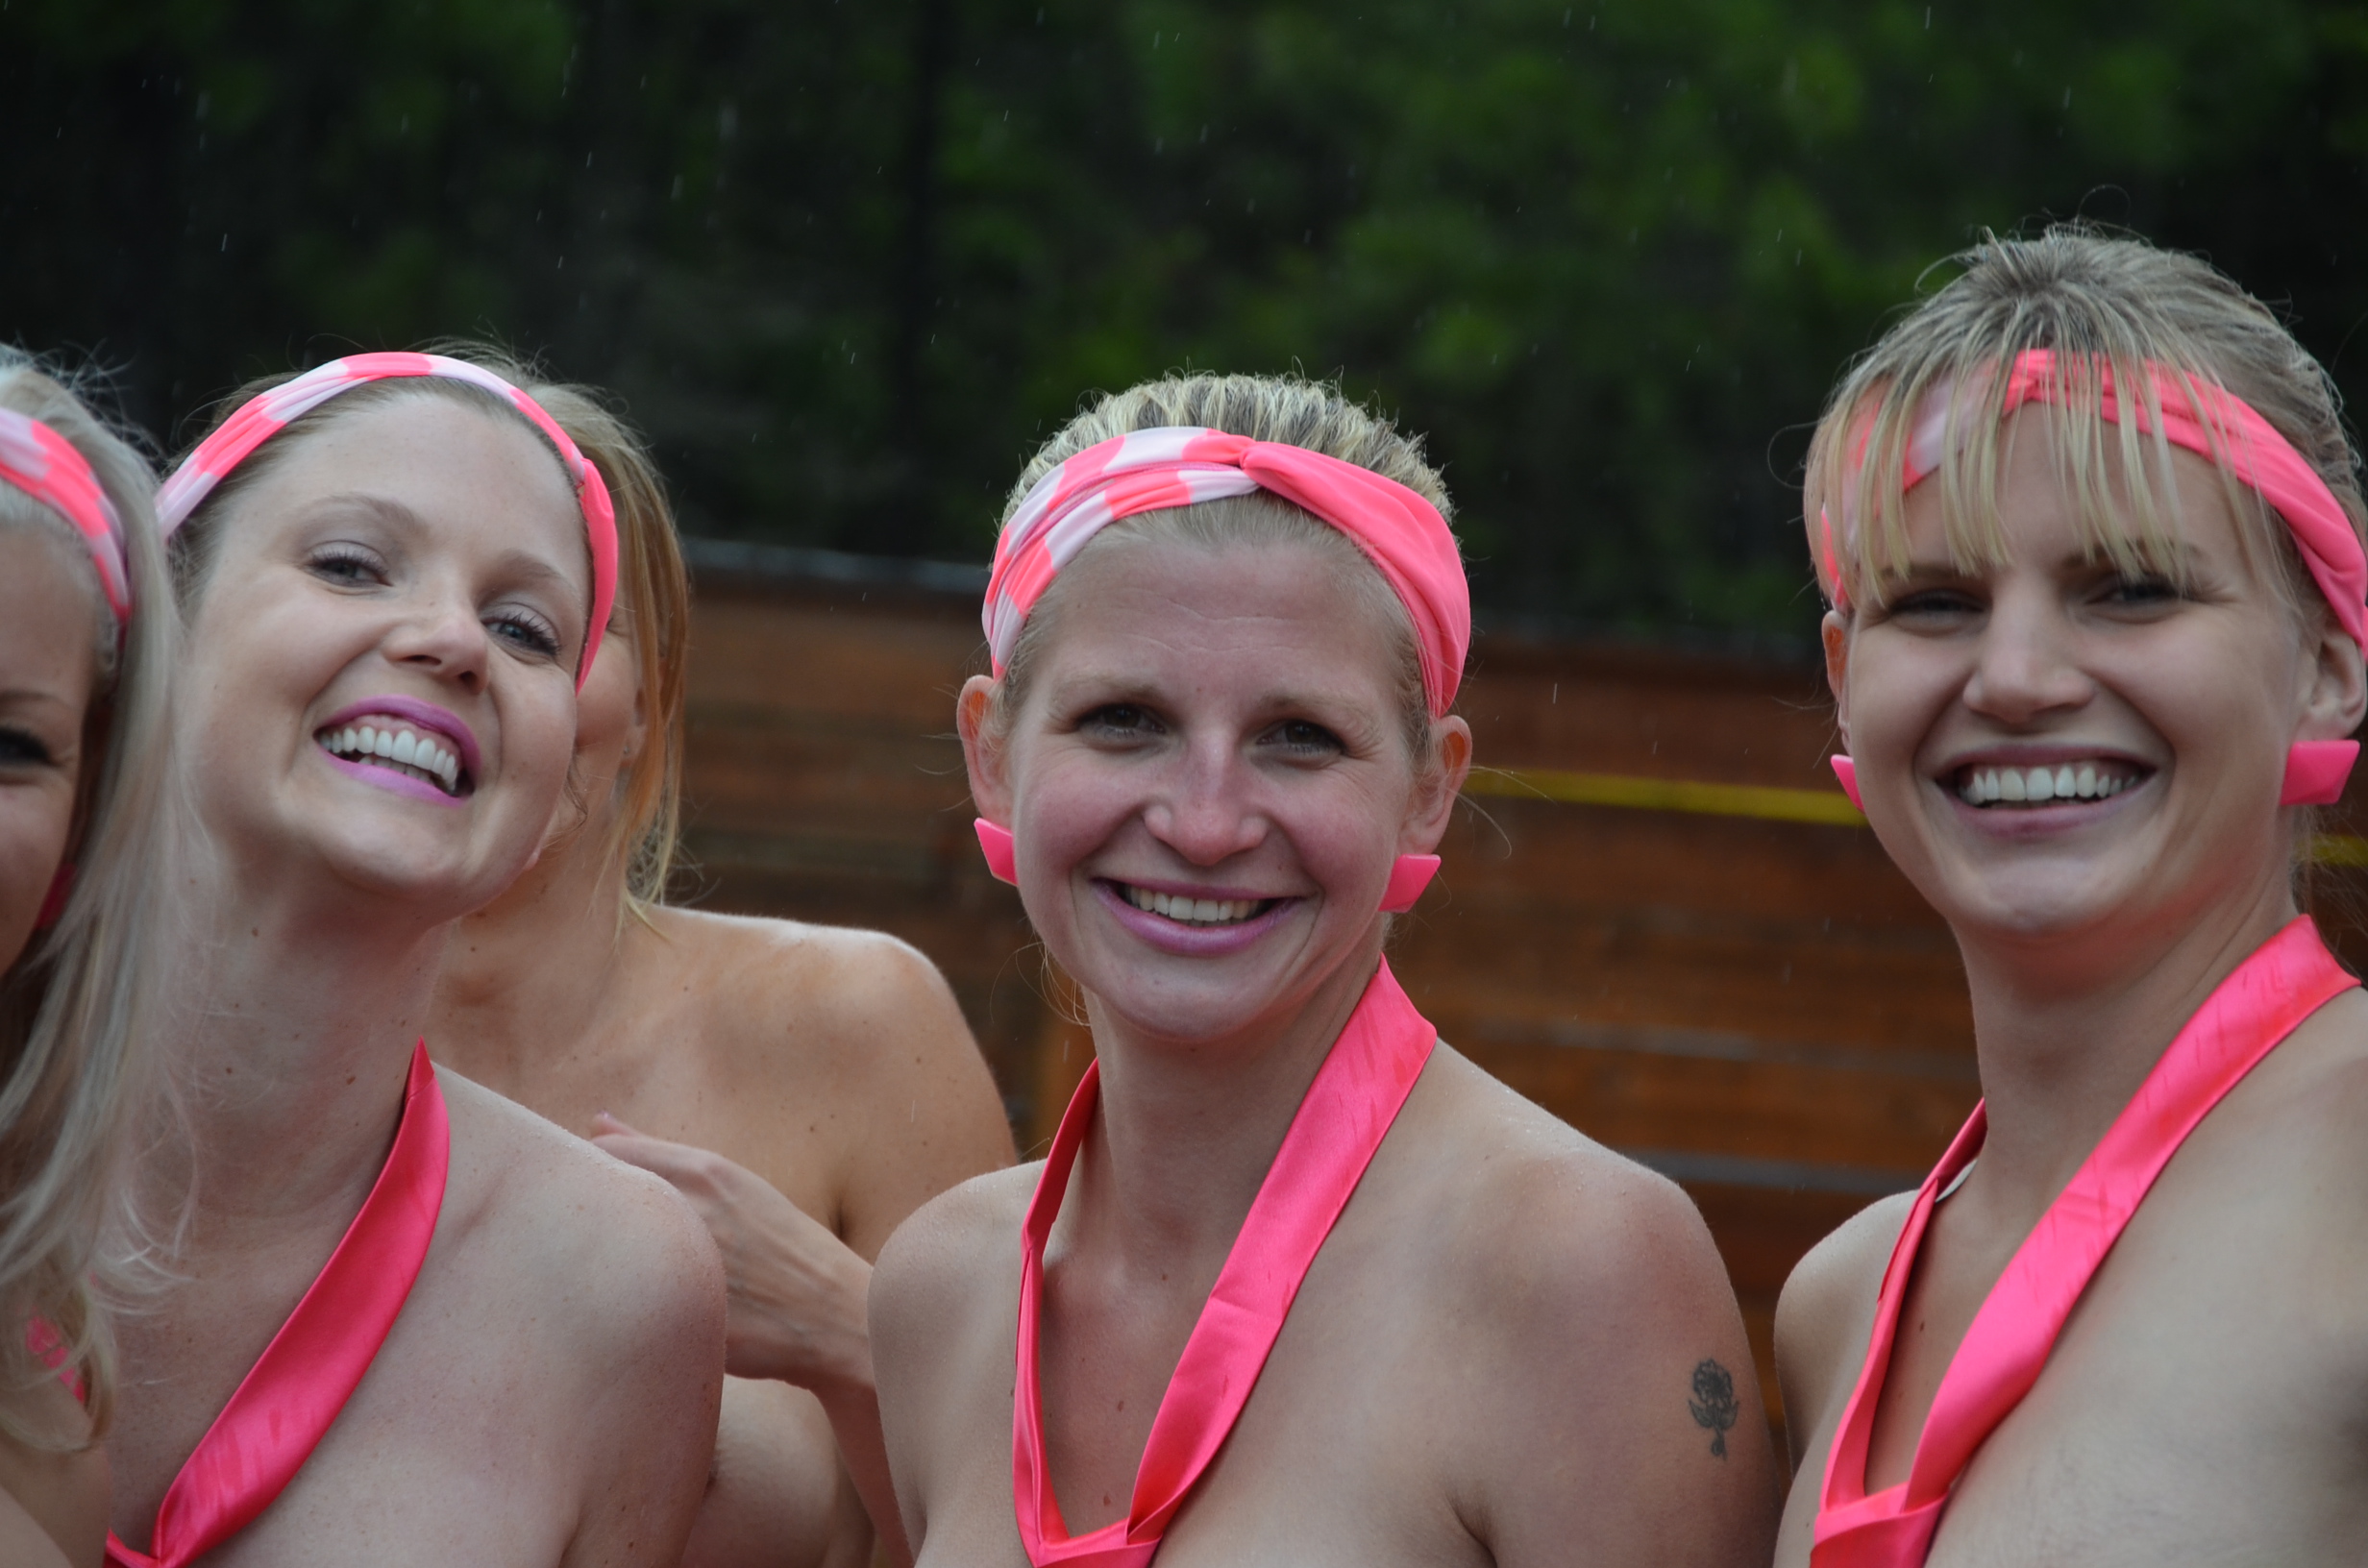 Naked zipliners brave rainy weather for breast can image